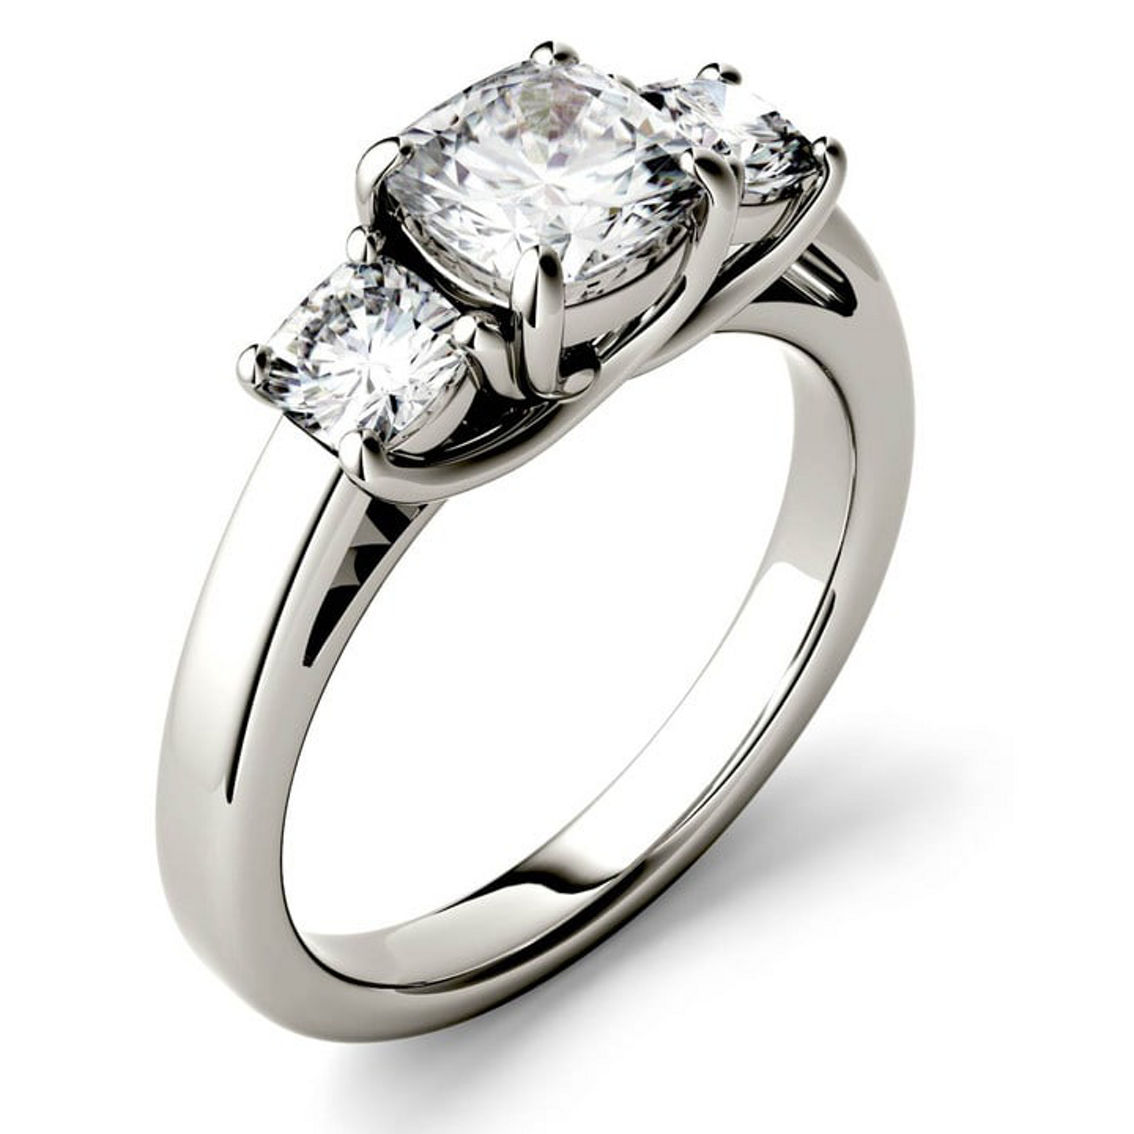 Charles & Colvard 1.76cttw Moissanite Cushion Three Stone Ring in 14k White Gold - Image 2 of 5